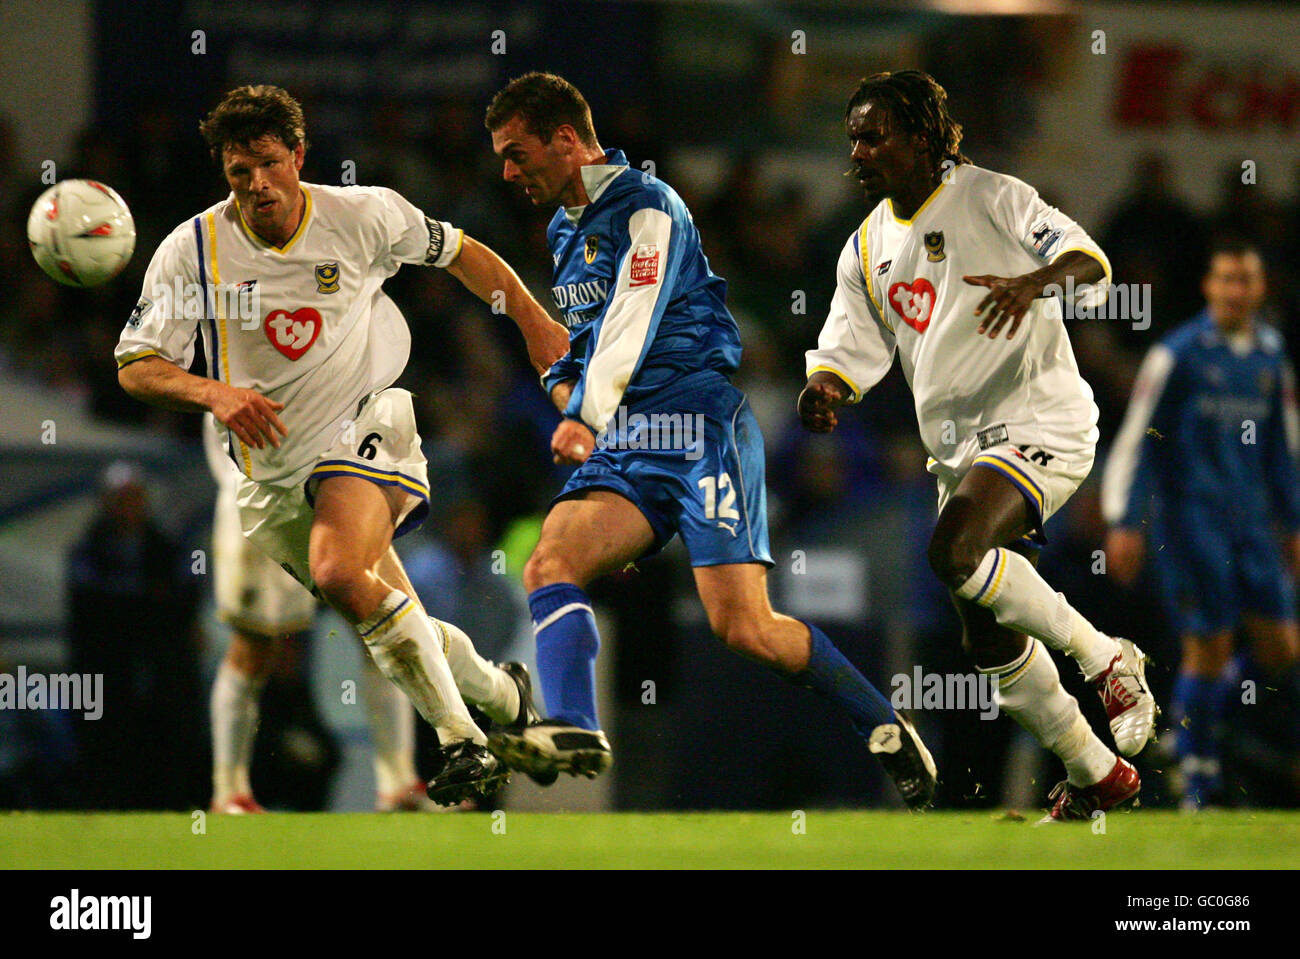 Cardiff City's Willie Boland (c) battles for the ball with Portsmouth's Arjan De Zeeuw (l) and Aliou Cisse (r) Stock Photo